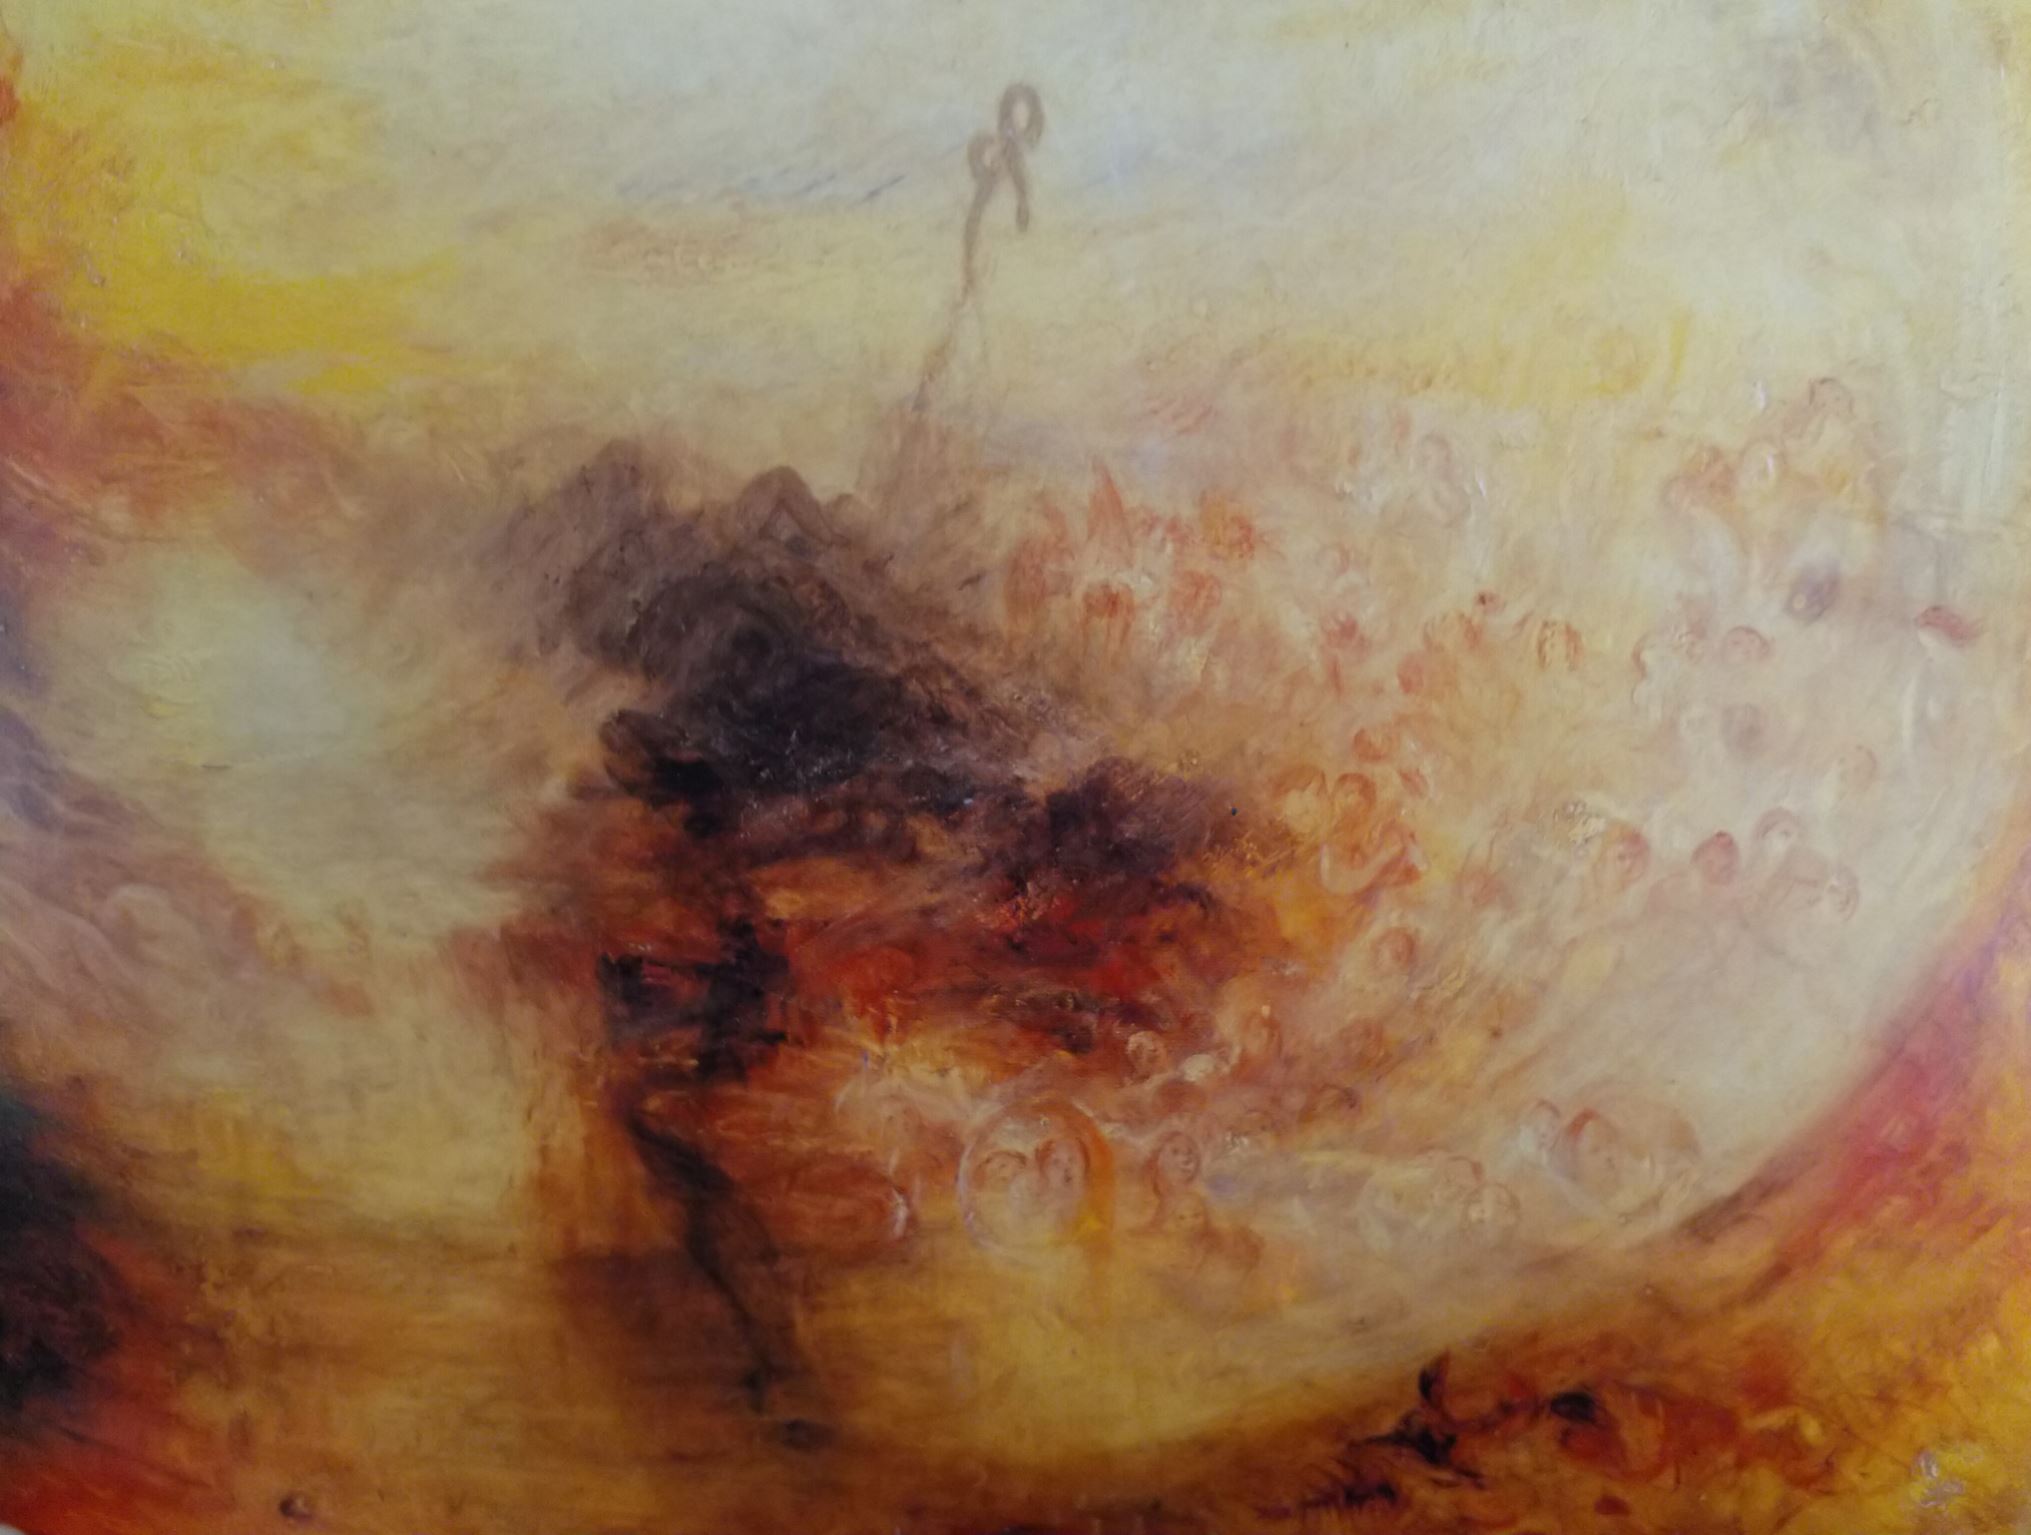 turner 1843 deluge Night and Colour The Morning After the Deluge detail